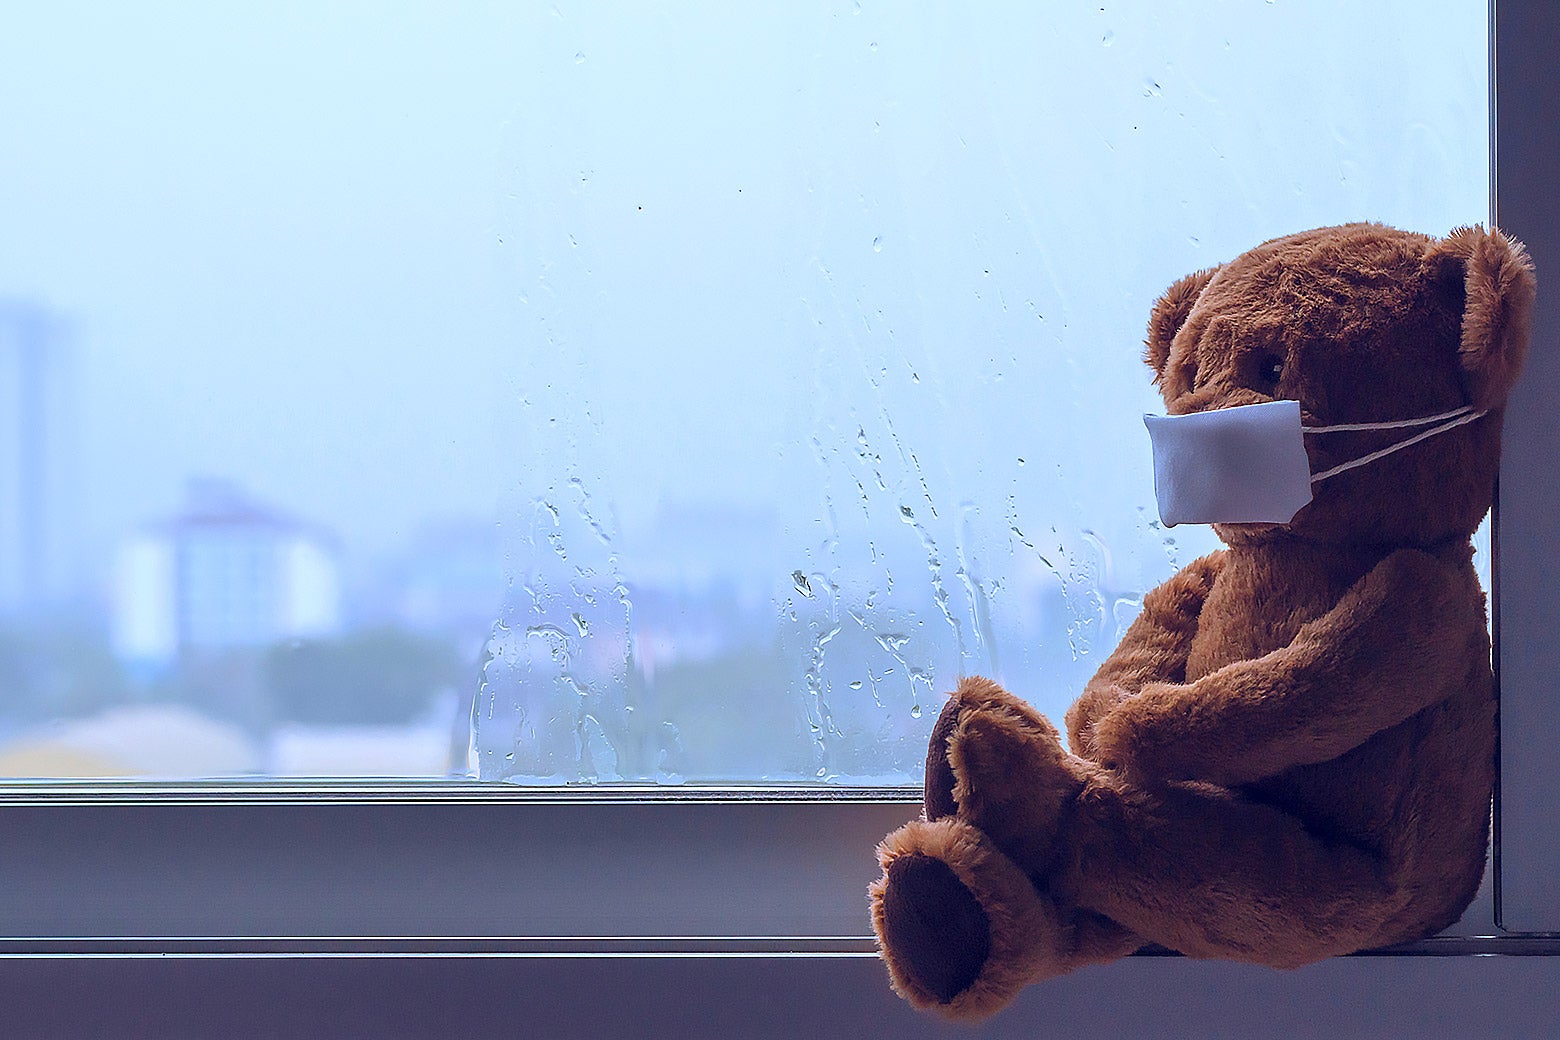 A teddy bear wearing a mask, sitting cross-legged, and looking out of a window on a rainy day.